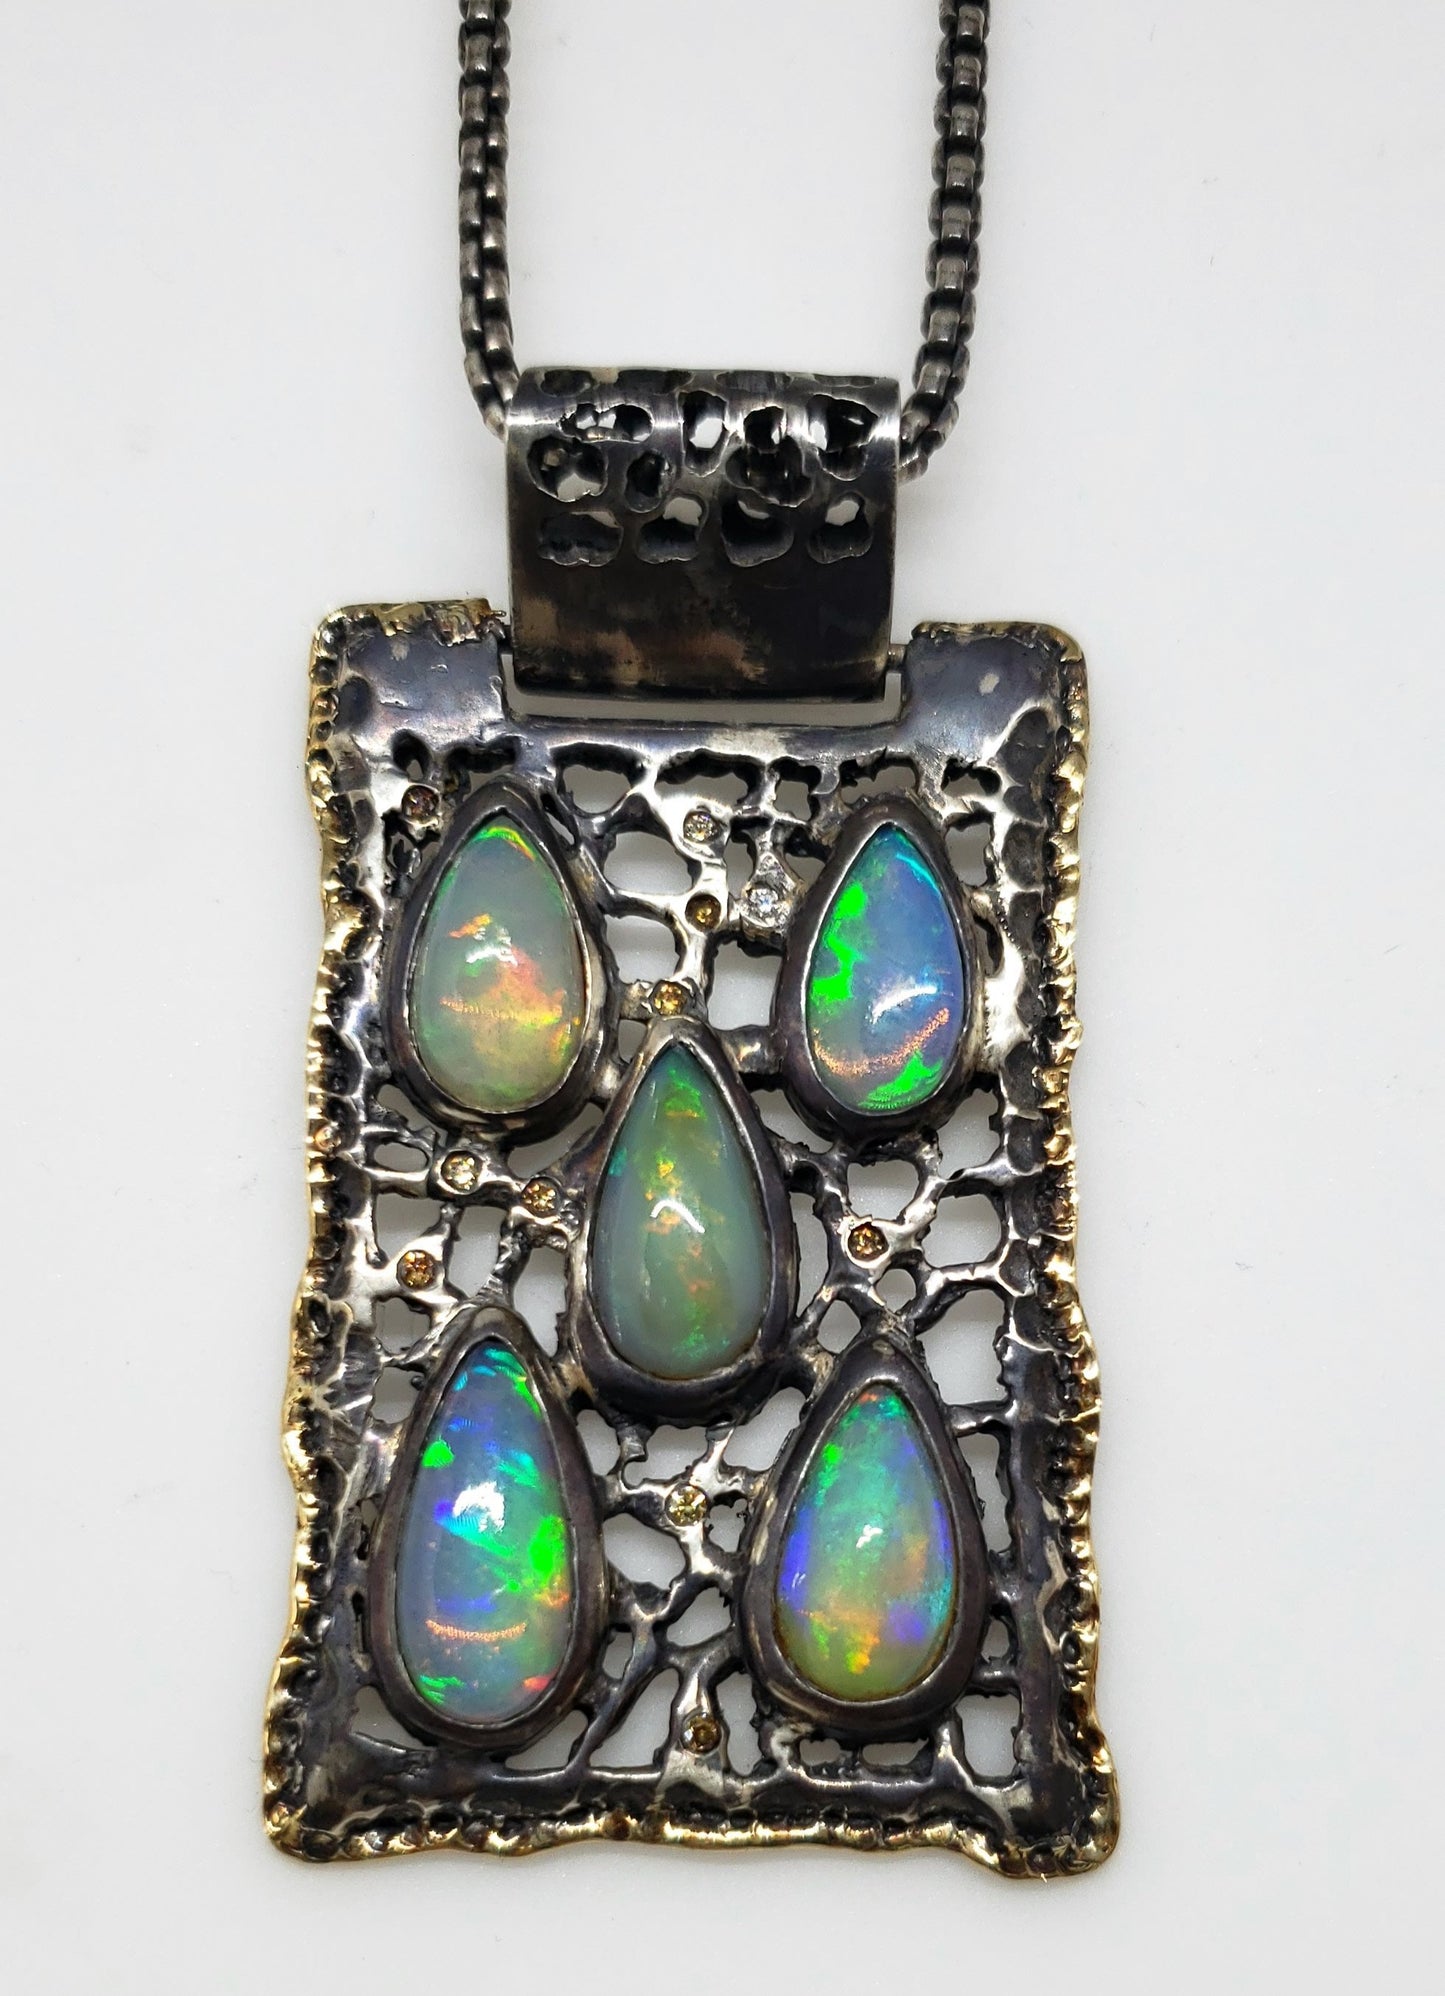 Opal Silver & Gold Pendant Necklace #130